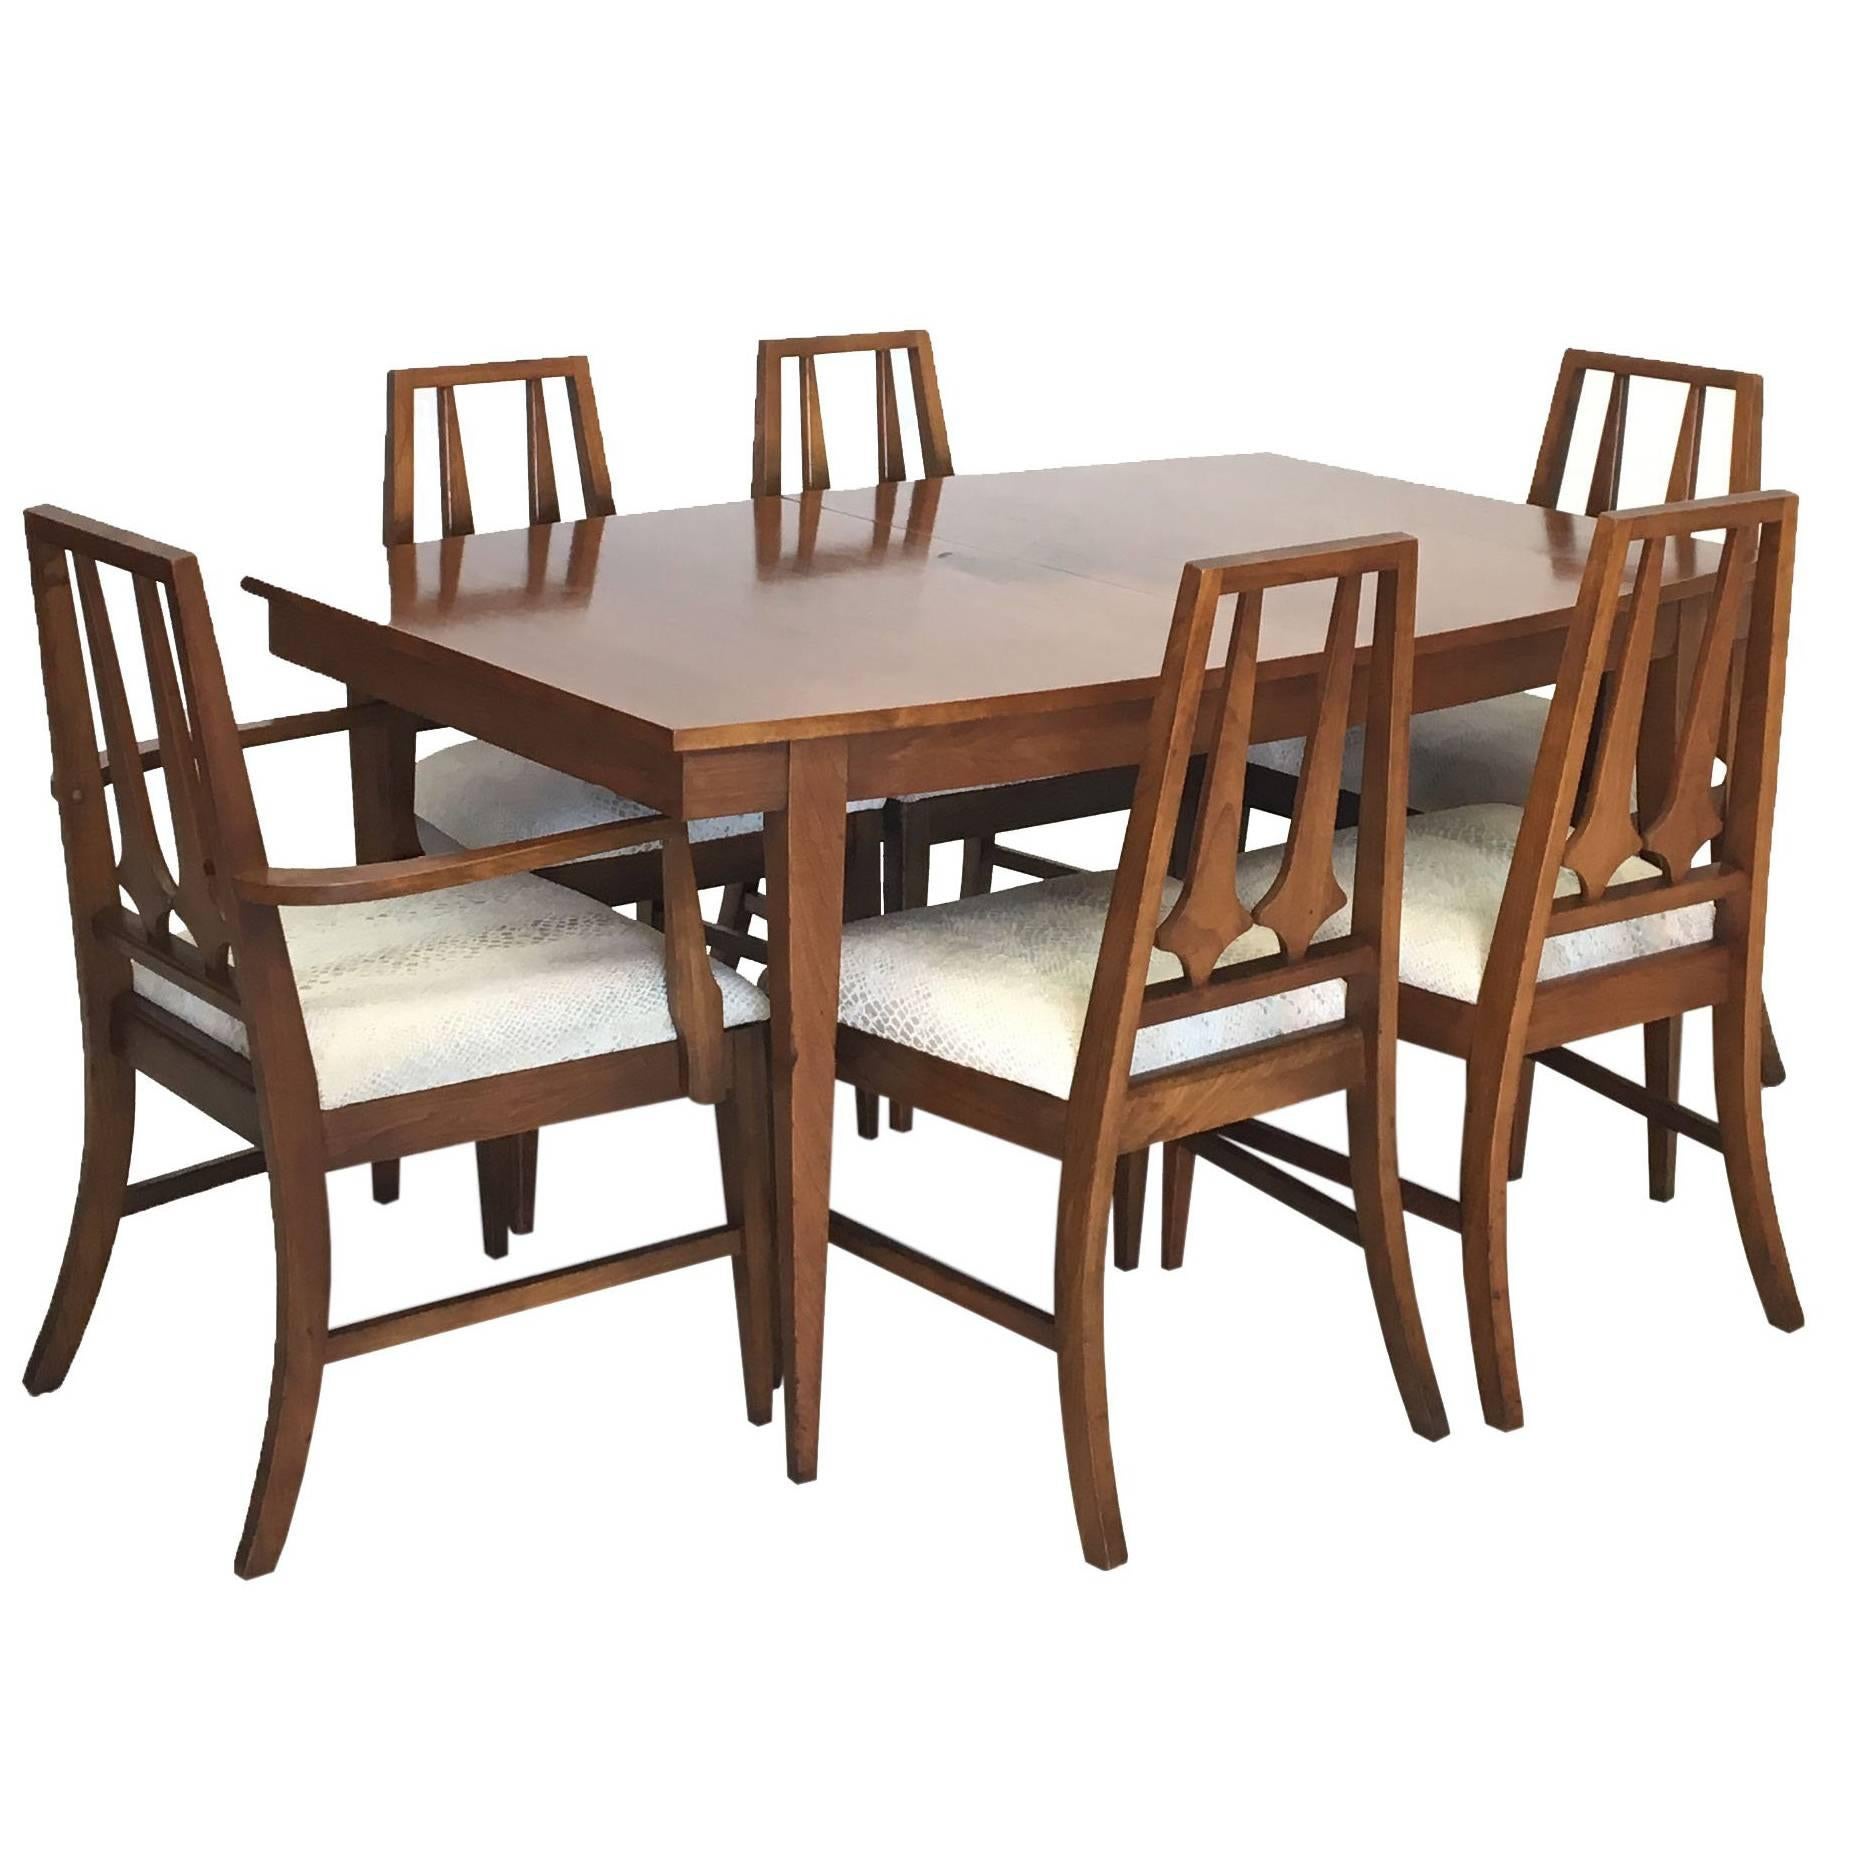 Mid-Century Modern Table and Six Chairs in the Brasilia Style For Sale